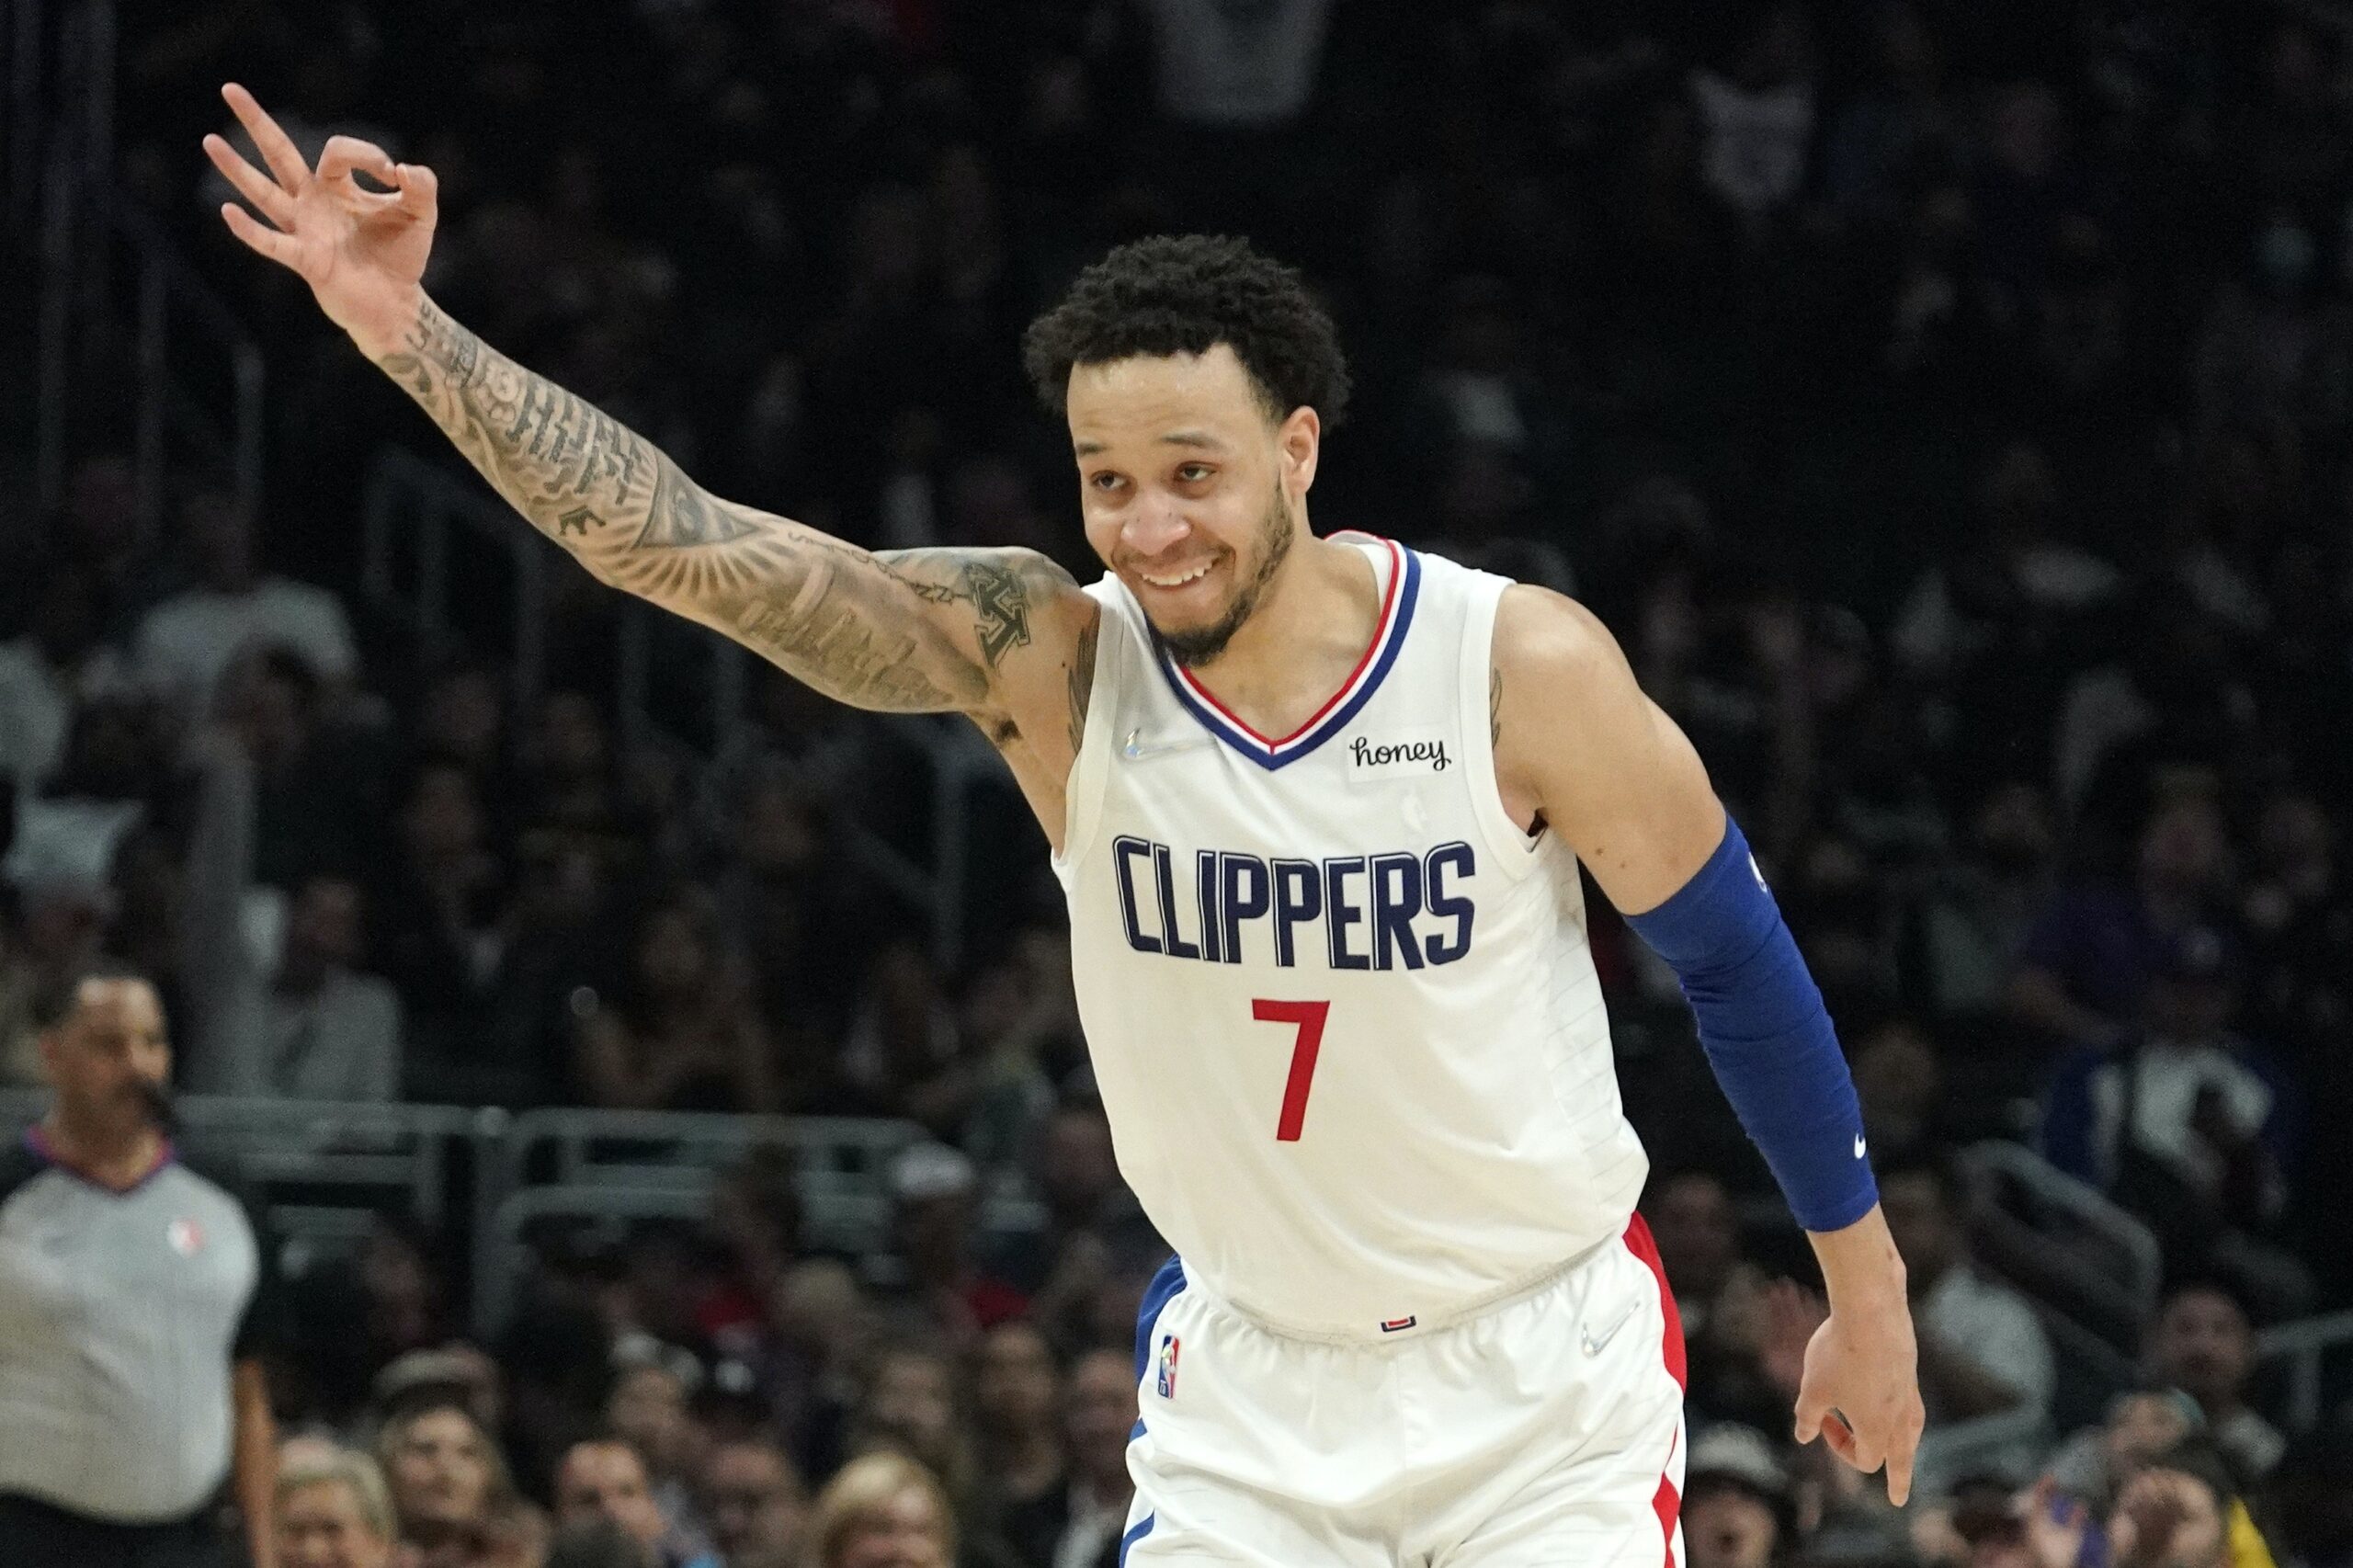 Amir Coffey with Los Angeles Clippers (Source: startribune.com)